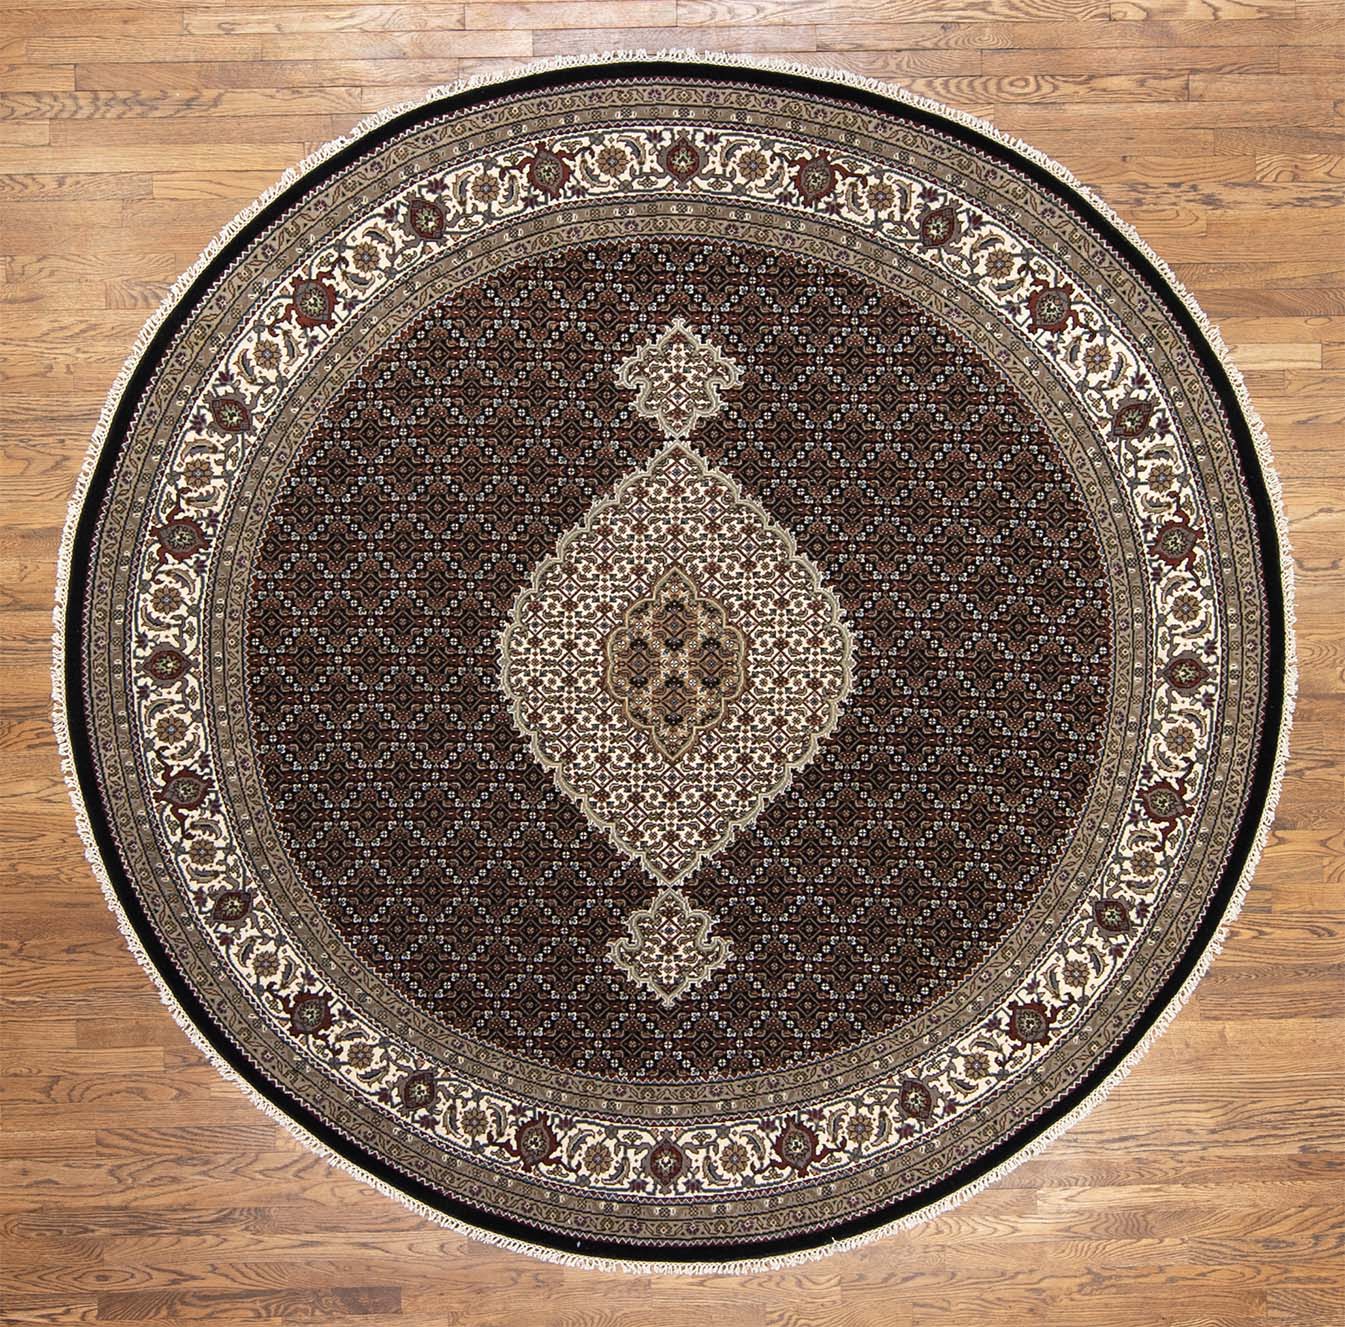 Round area rug. Handmade wool round area rug in black and white color made in India. Rug size is 8.4x8.4.